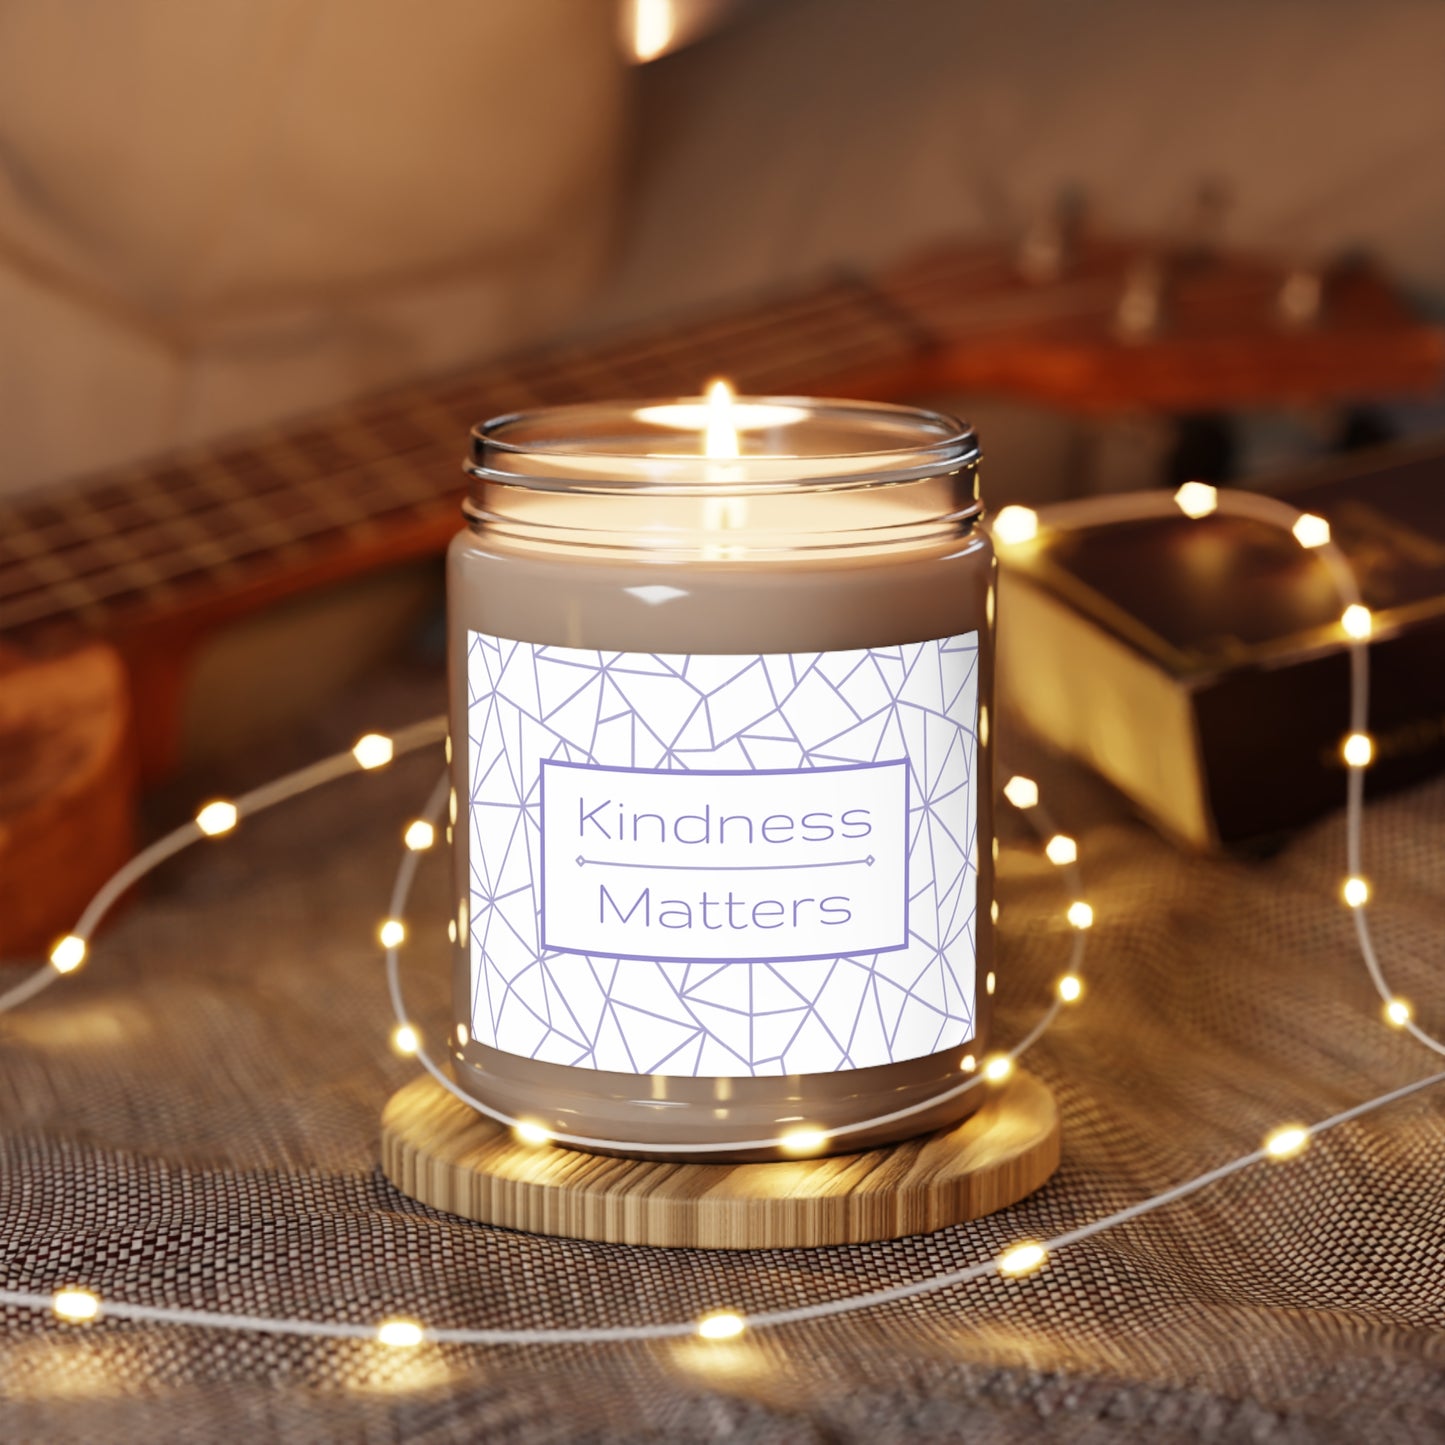 Kindness Matters 100% Soy Scented Candles, 9oz